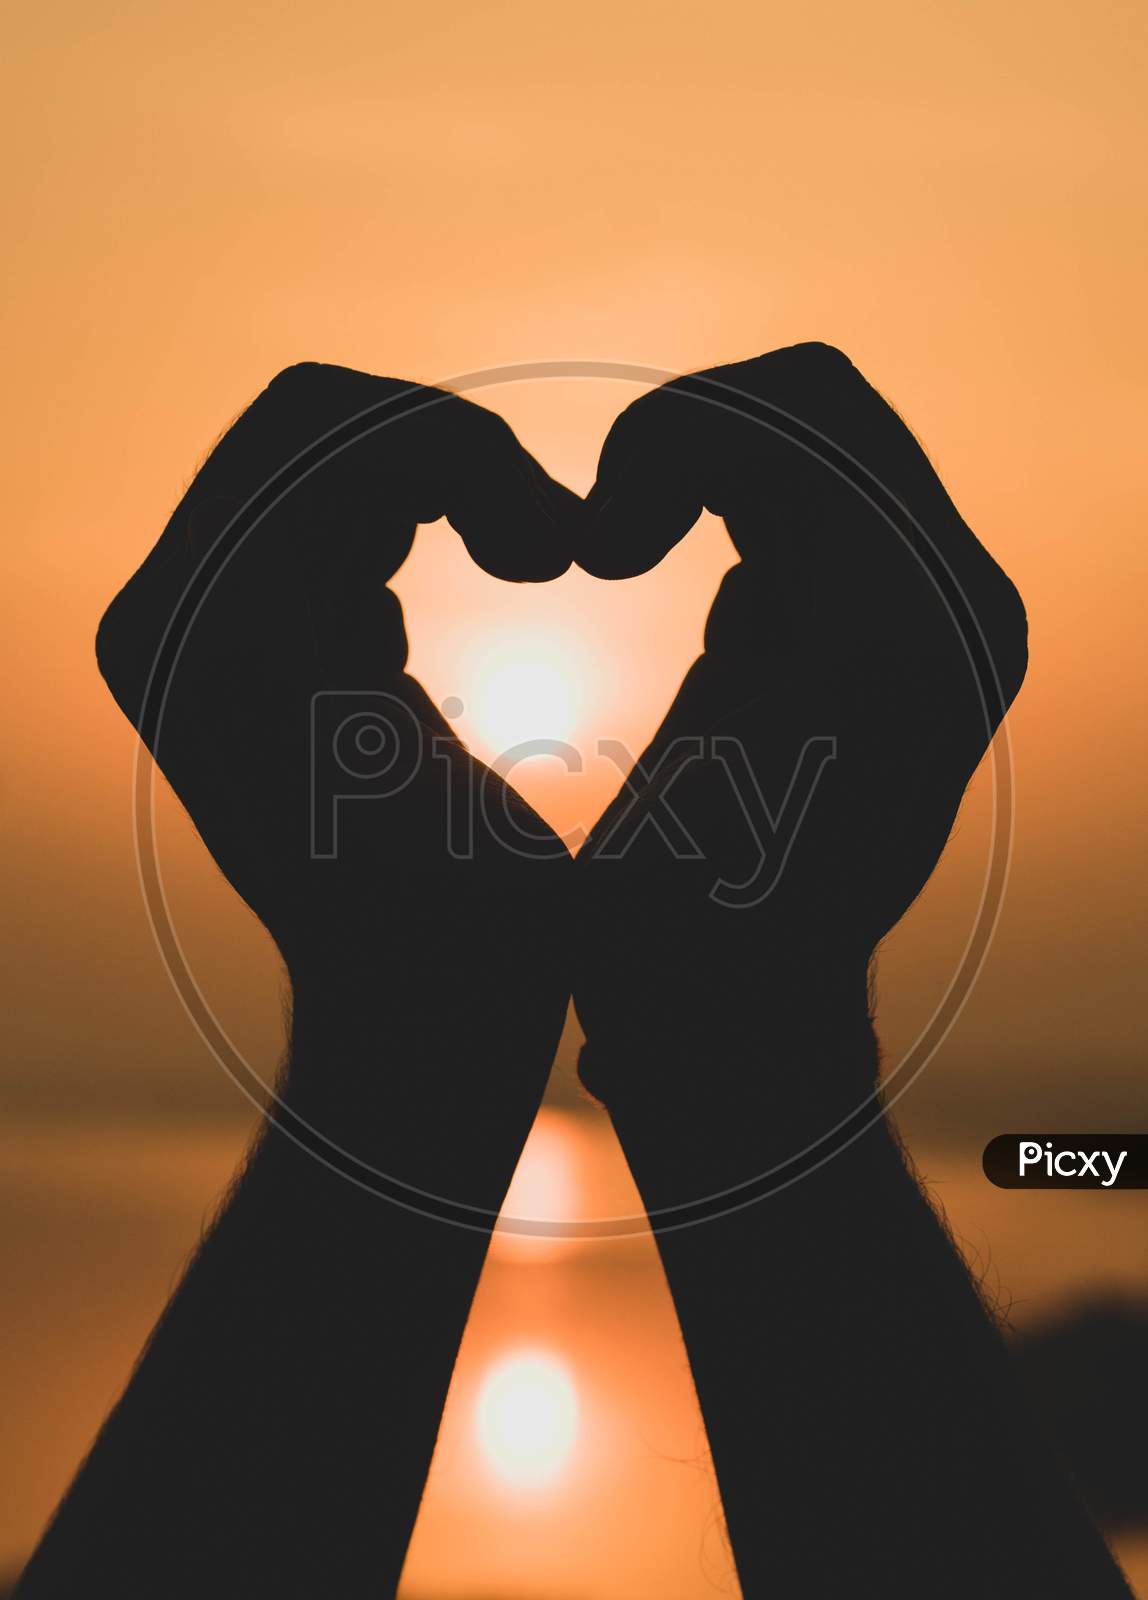 Hands Forming A Heart Shape With Sunset Silhouette.